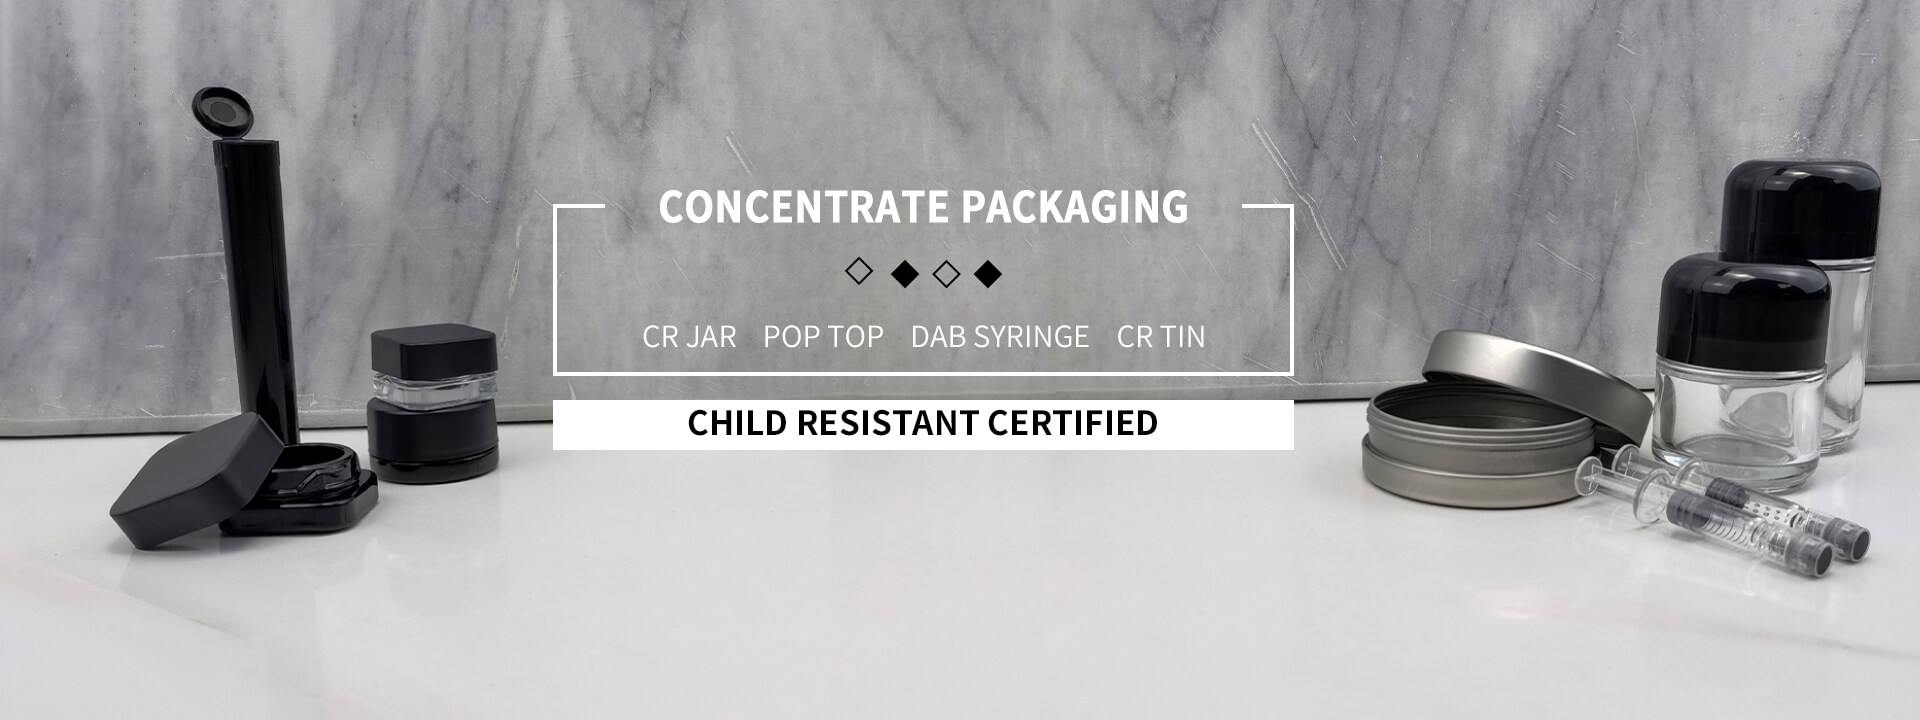 CR Concentrate Packaging